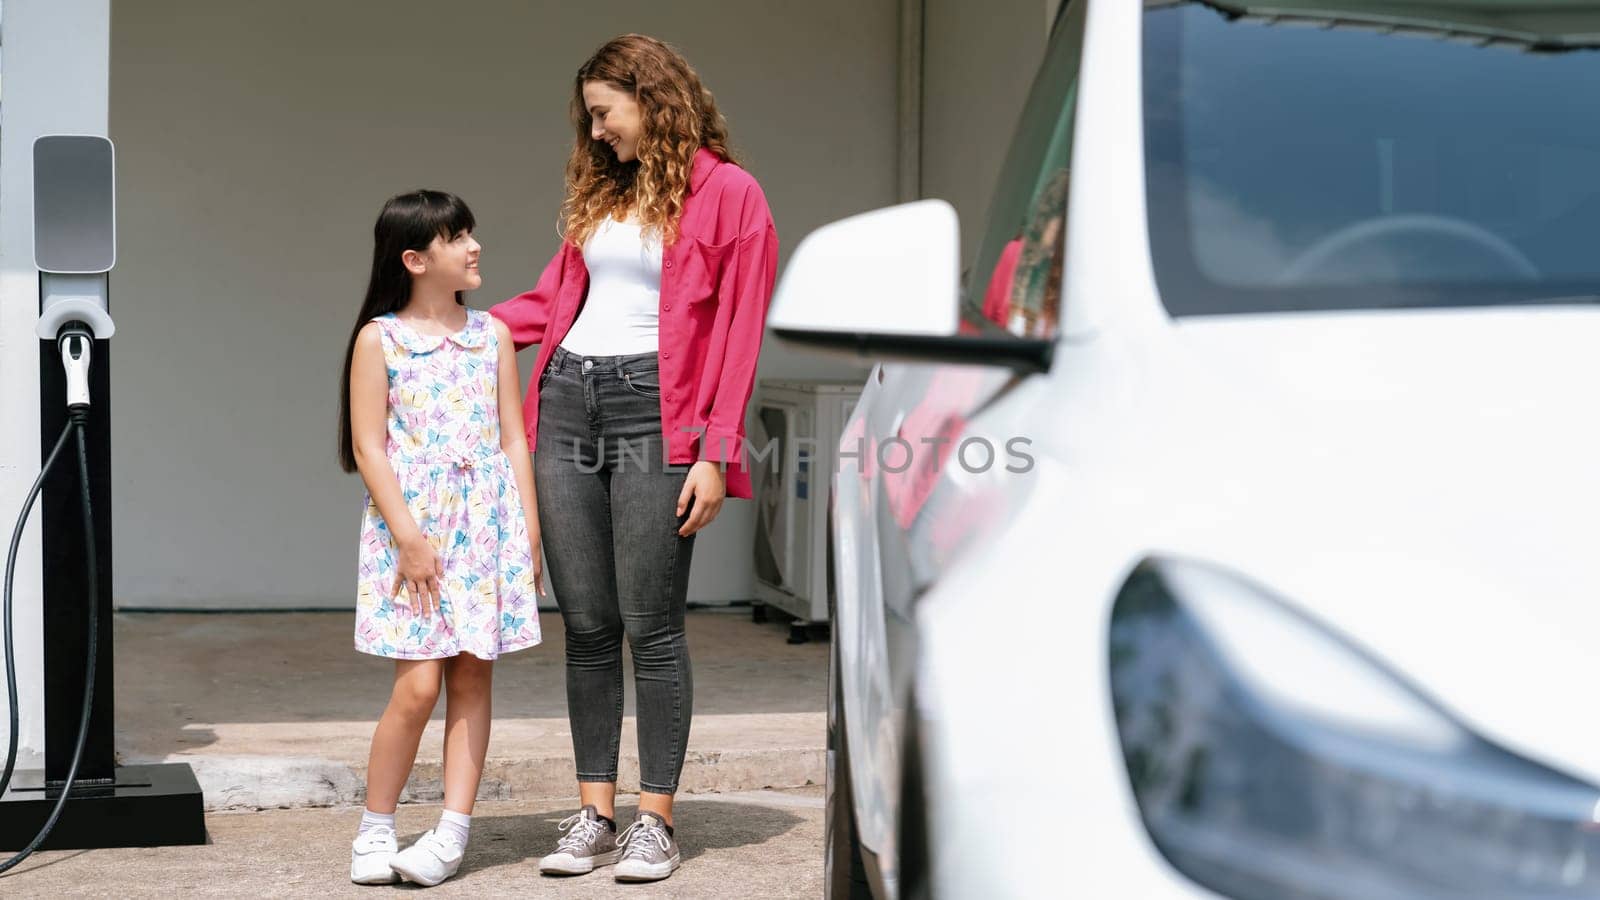 Happy little young girl learn about eco-friendly and energy sustainability as she help her mother recharge electric vehicle from home EV charging station. EV car and modern family. Panorama Synchronos